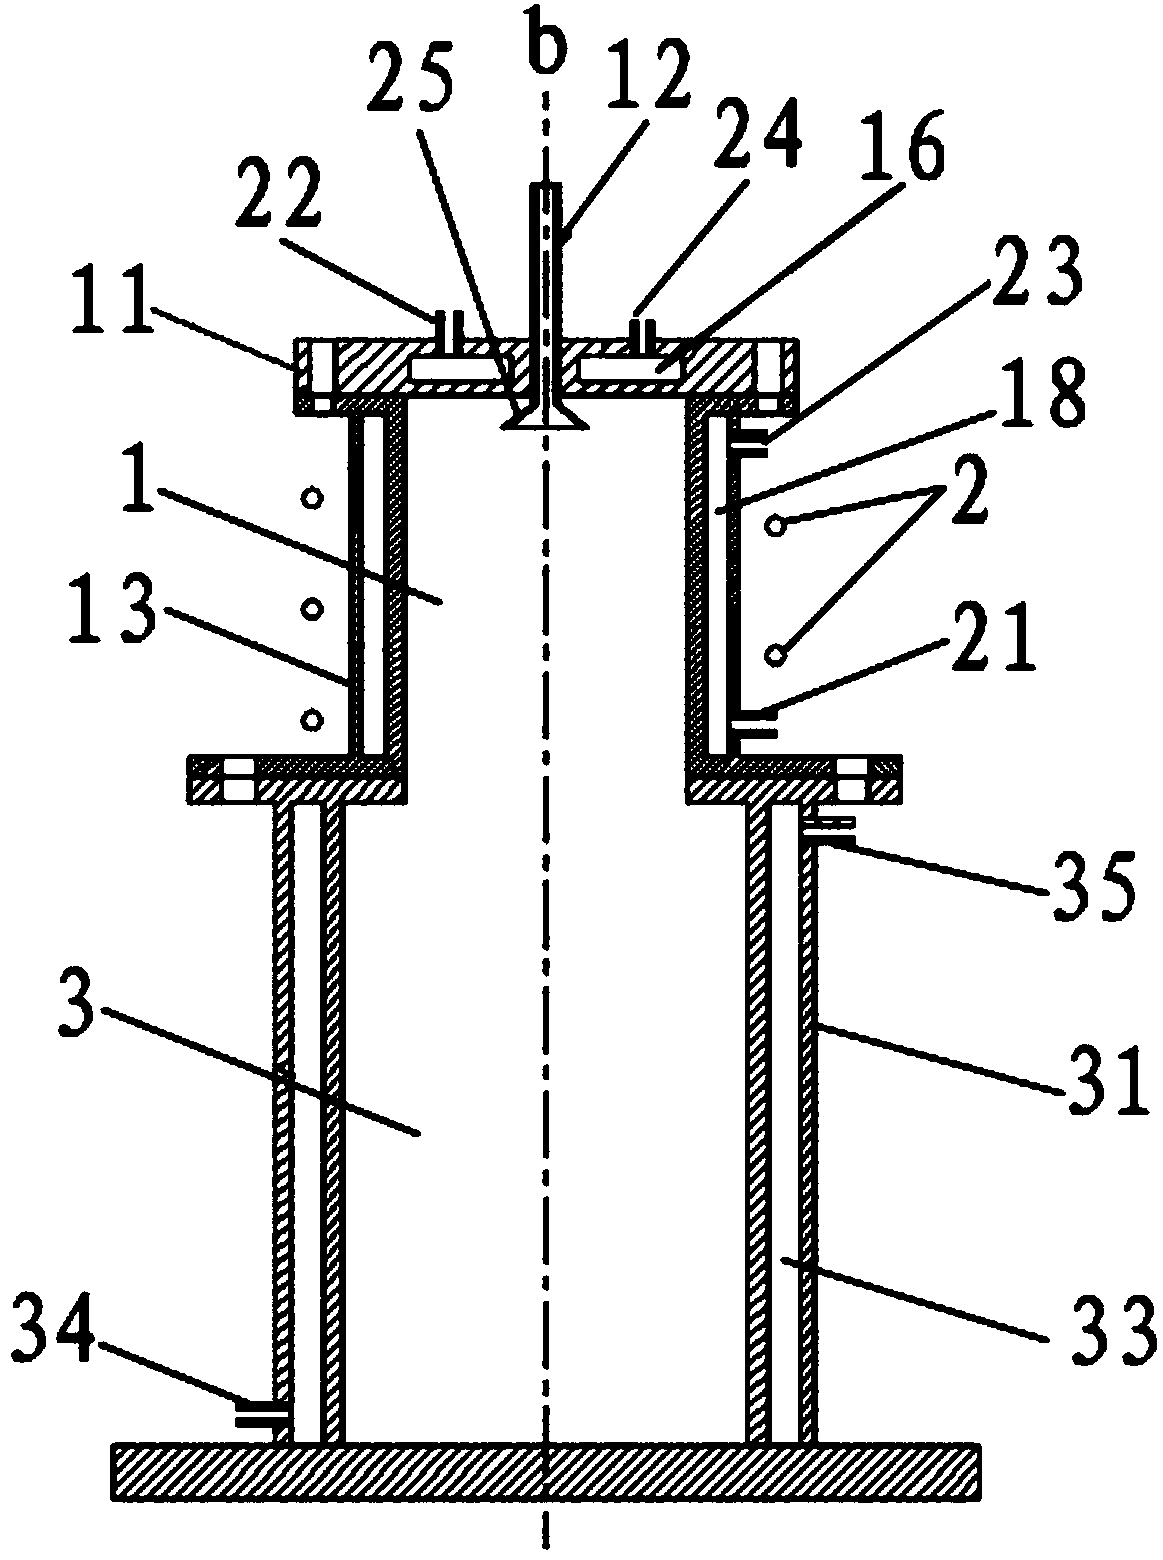 Device and system for spheroidizing powder by using alternating-current plasmas